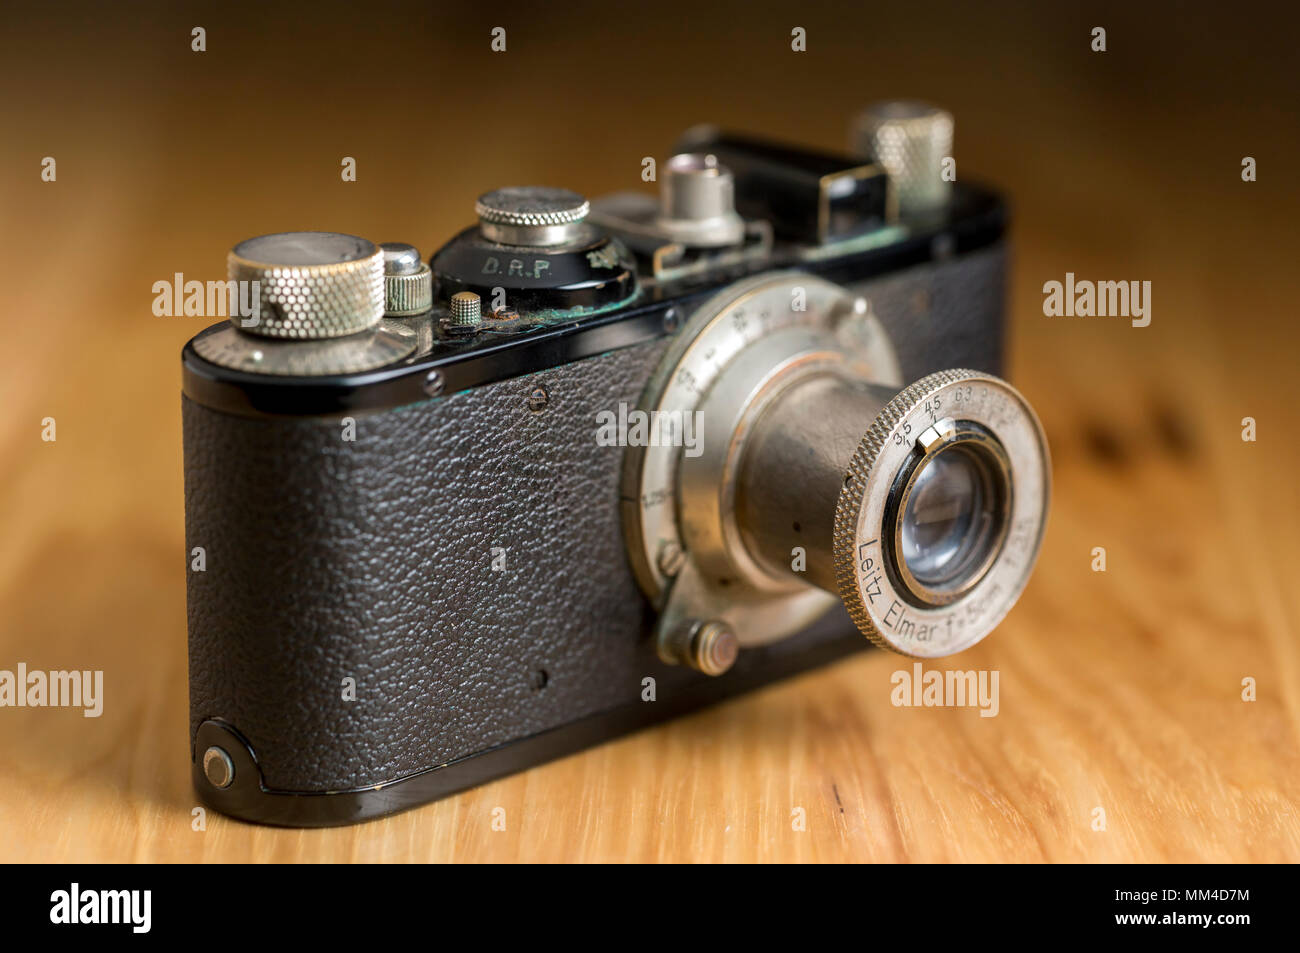 Vintage 35mm film camera, the Leica 1A with the 5cm lens. Stock Photo